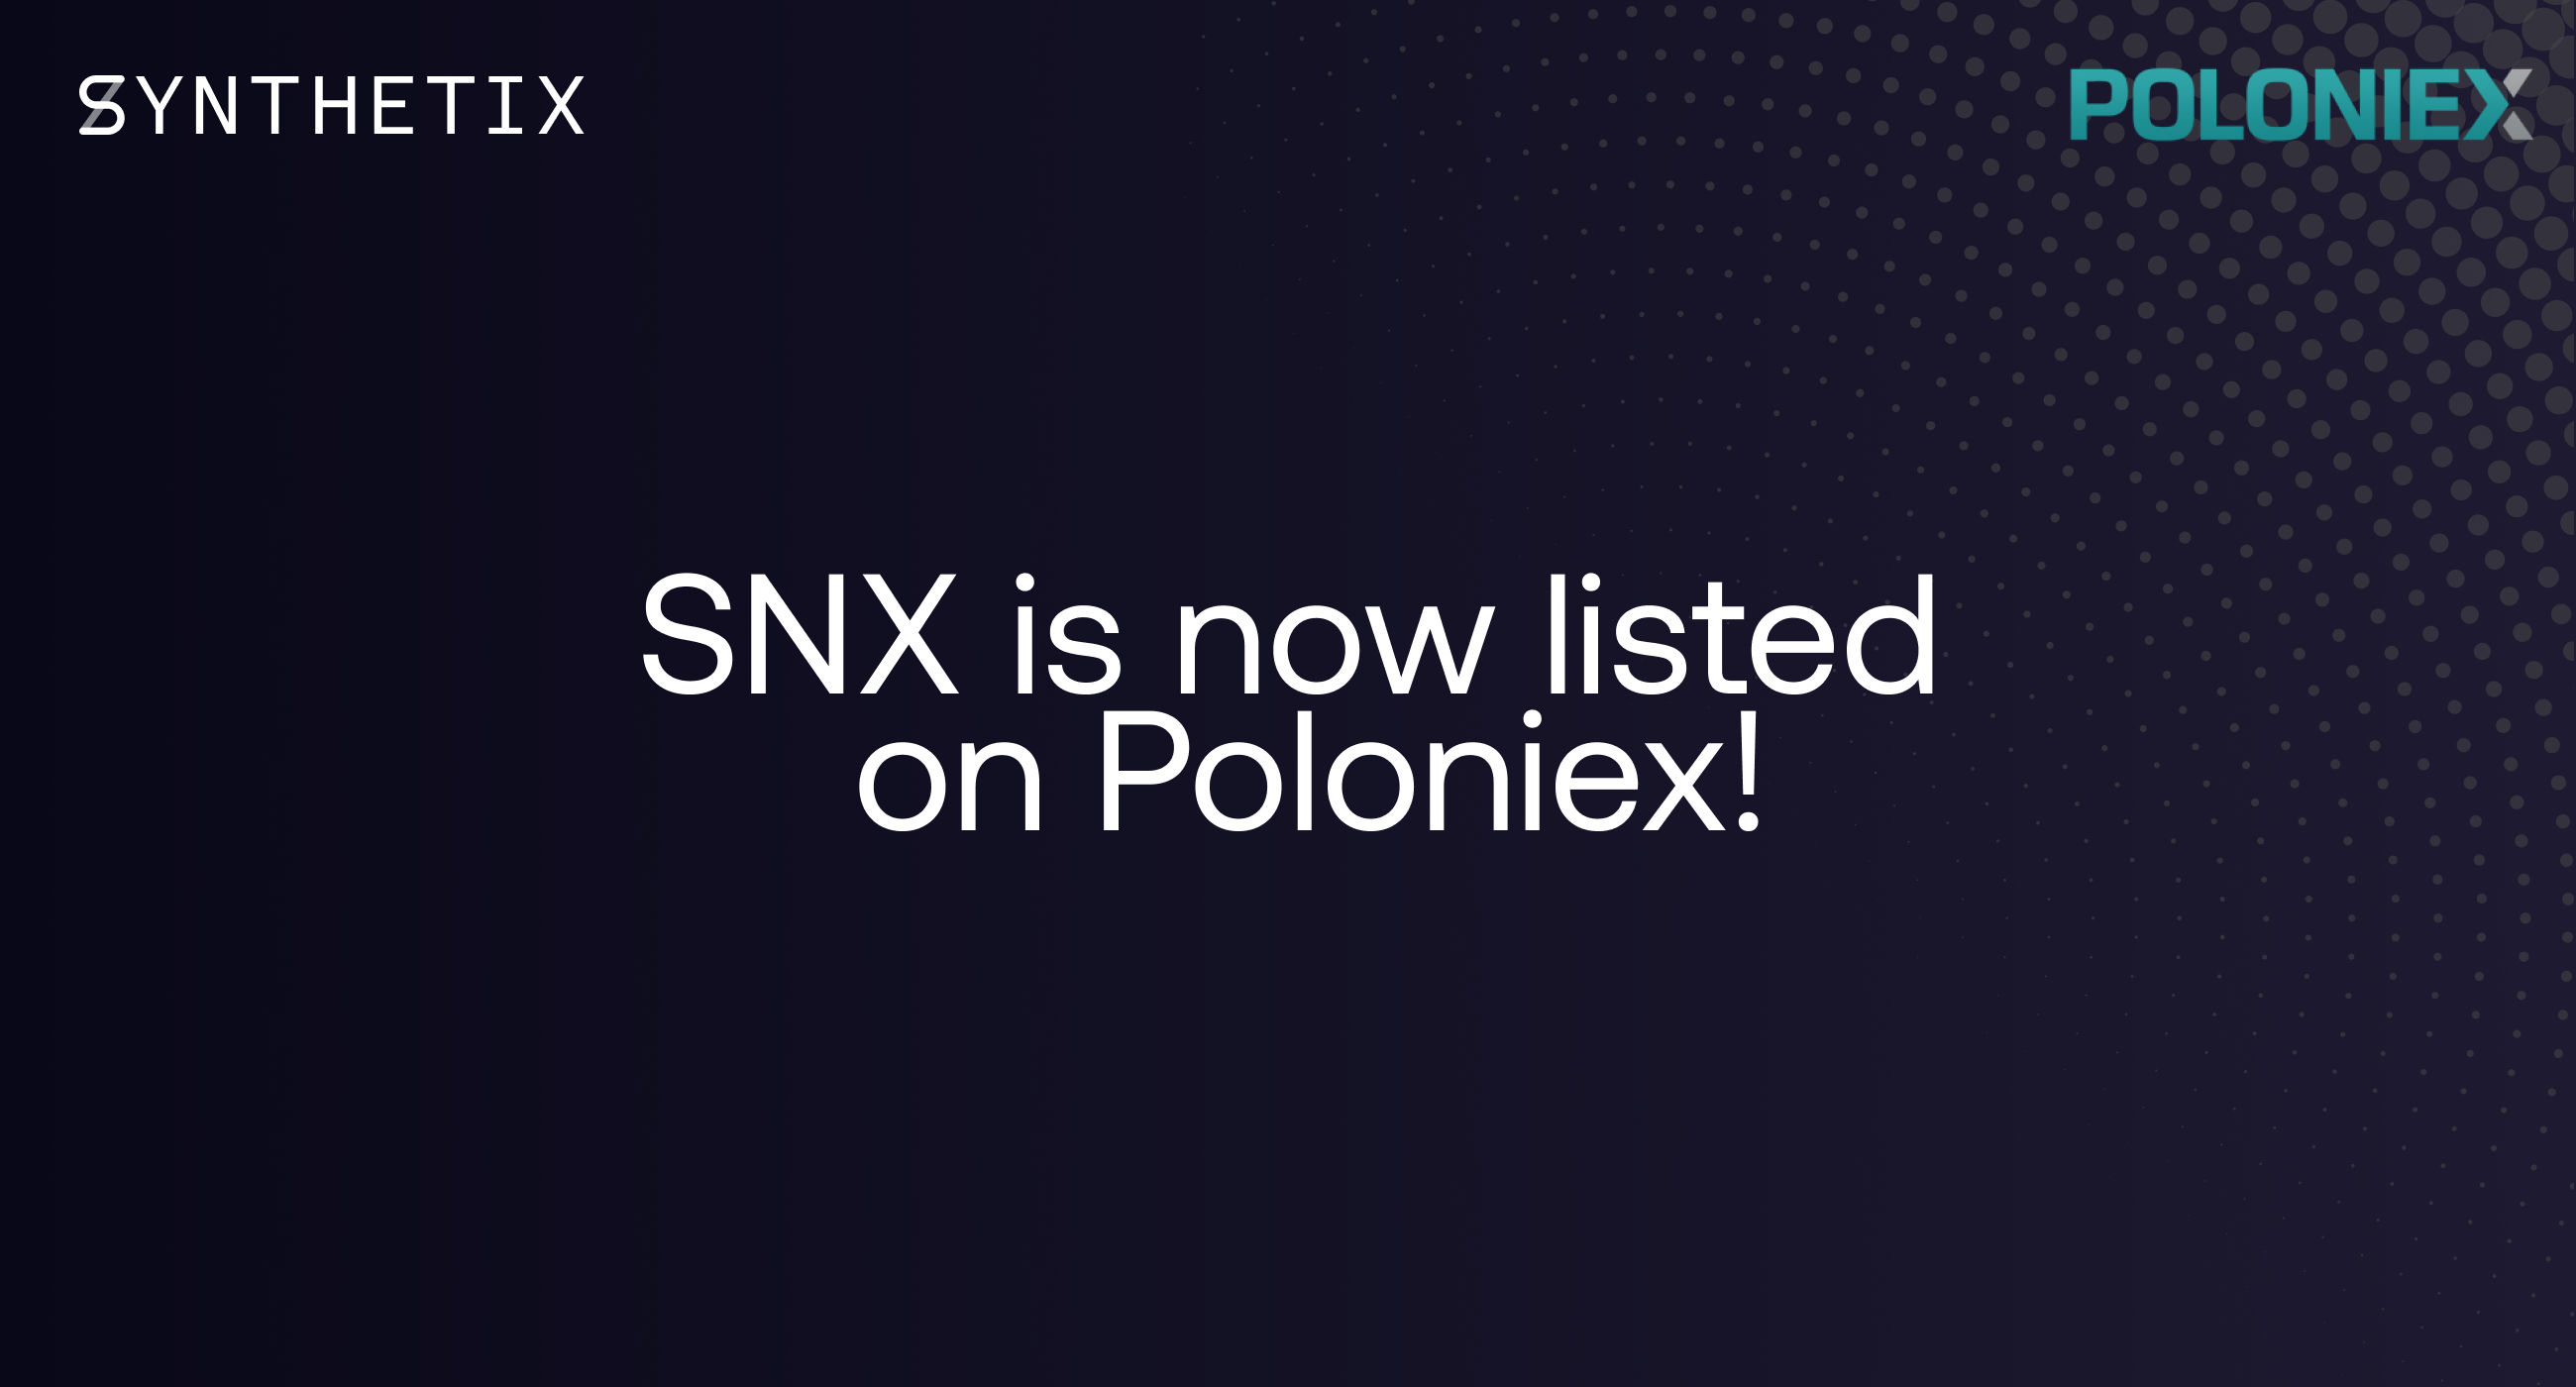 SNX is now listed on Poloniex!